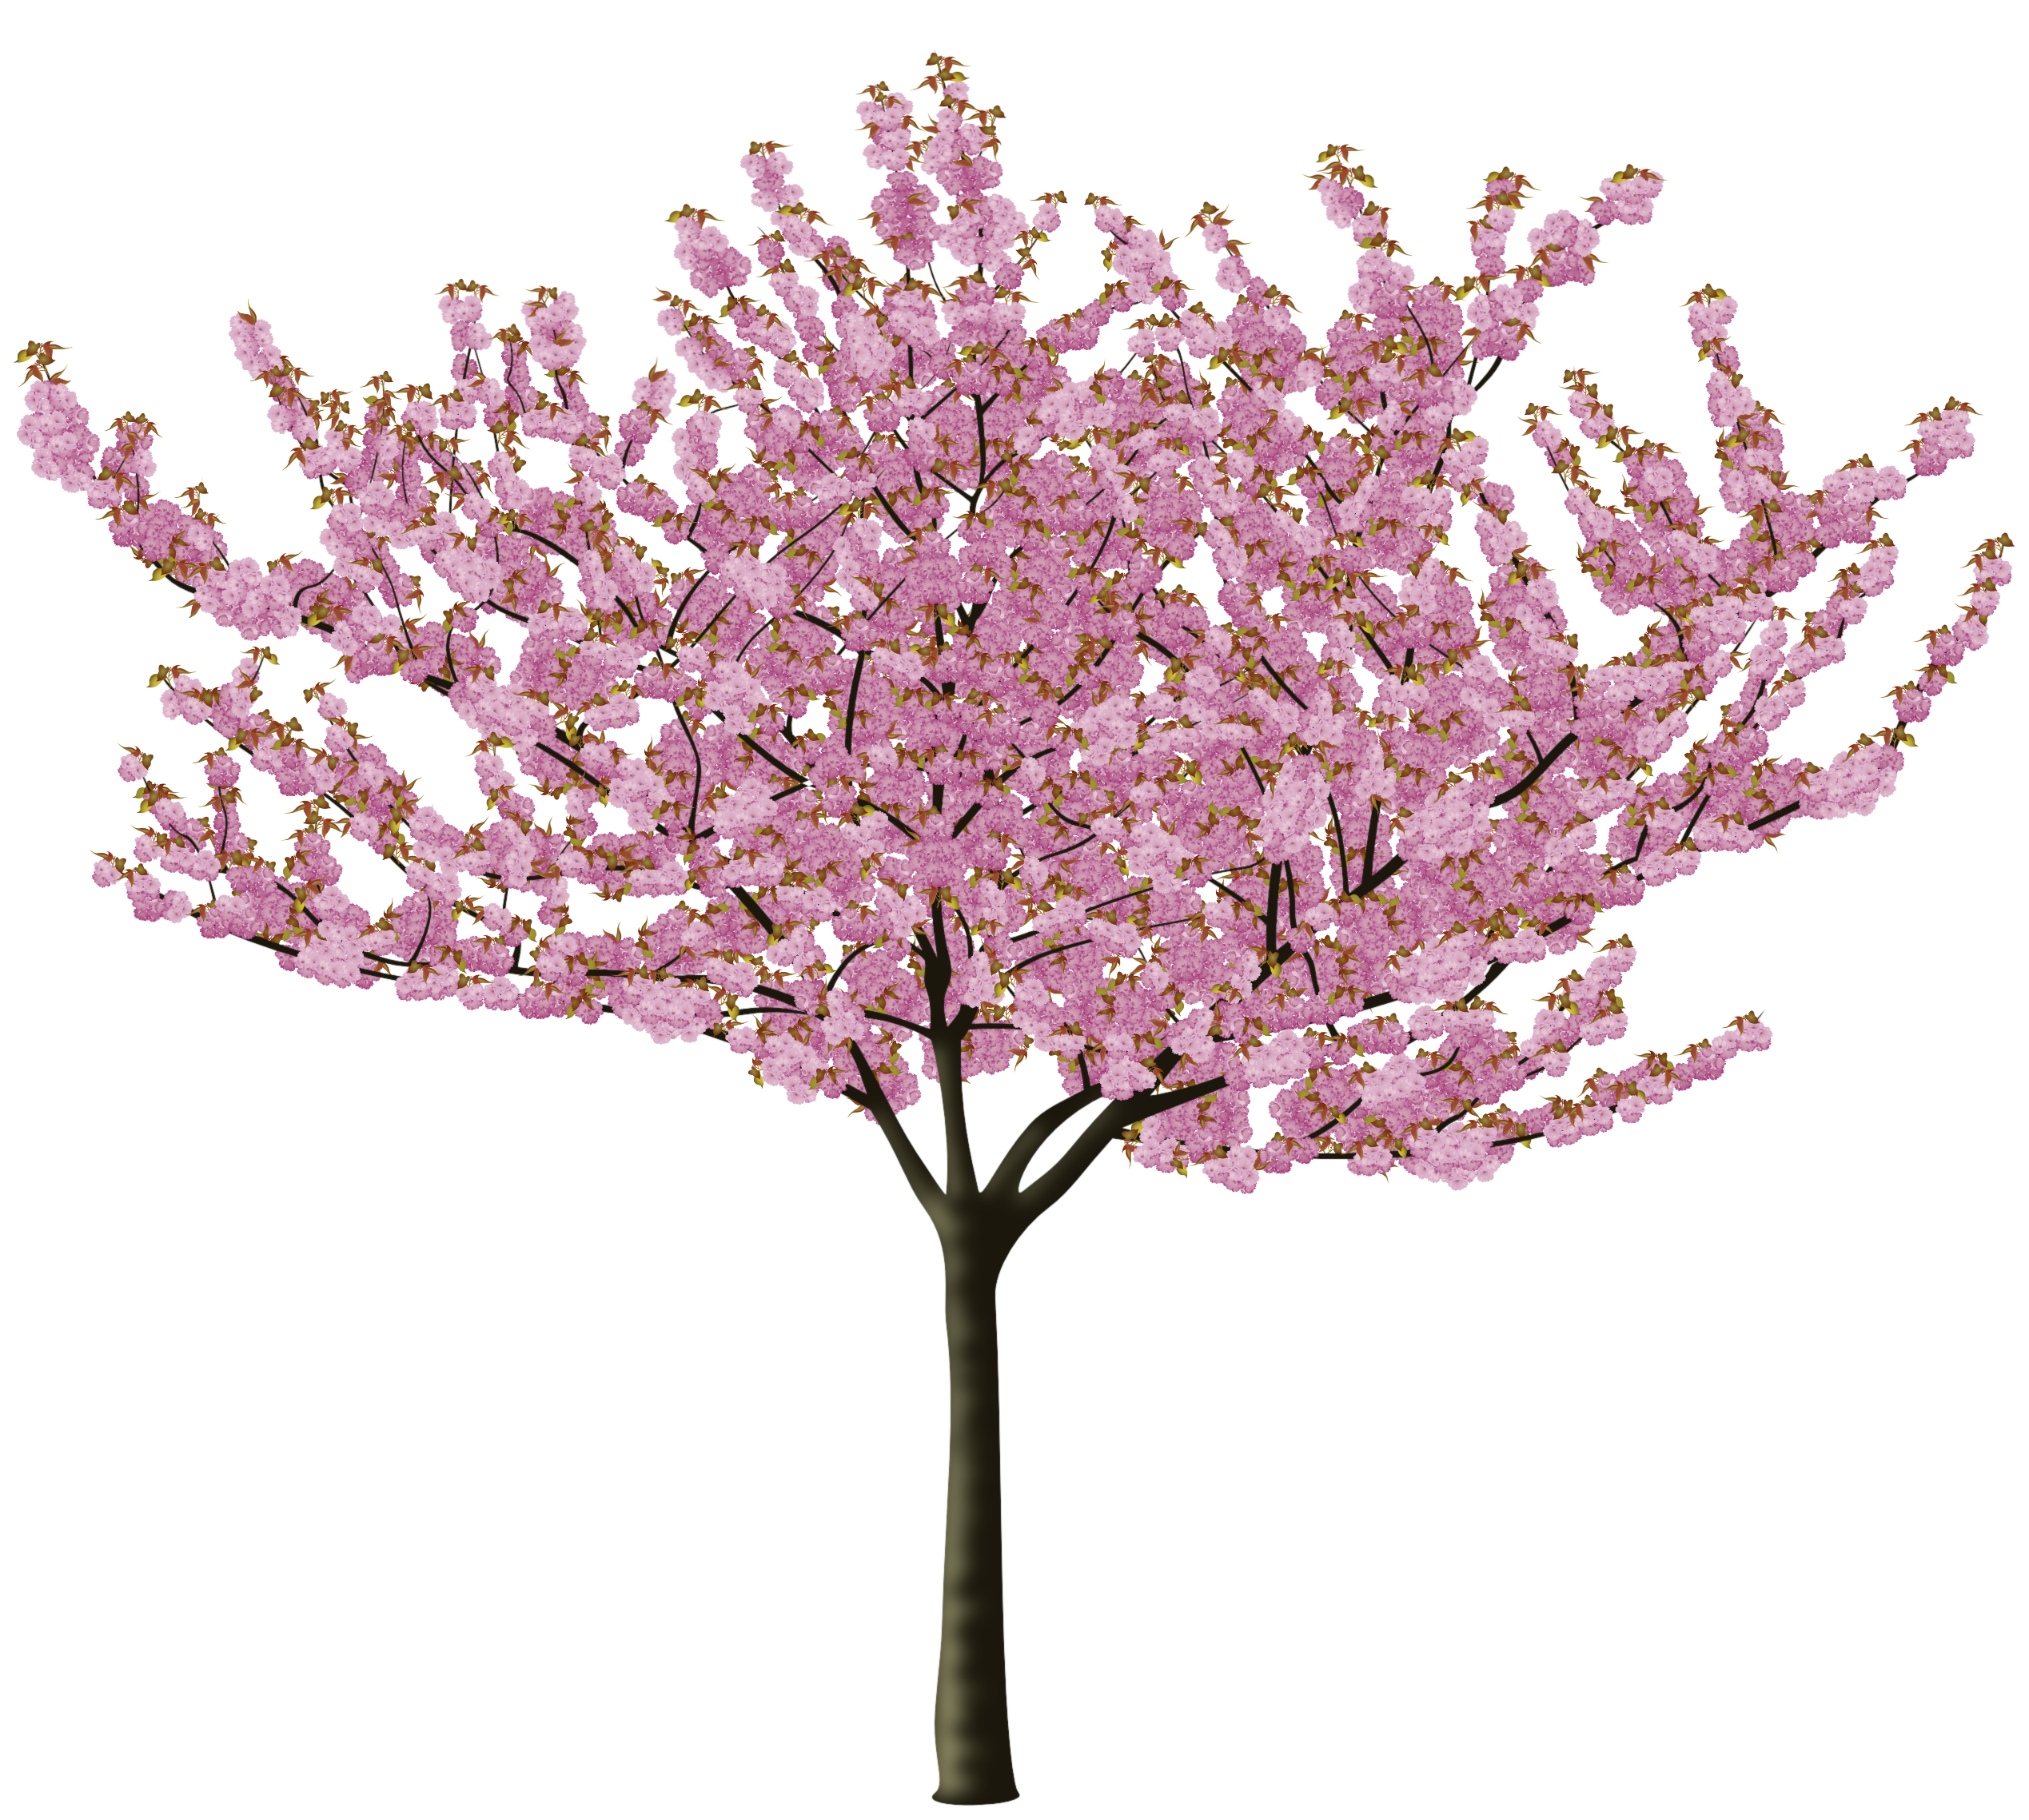 Cherry Blossom - Share your work - Affinity | Forum